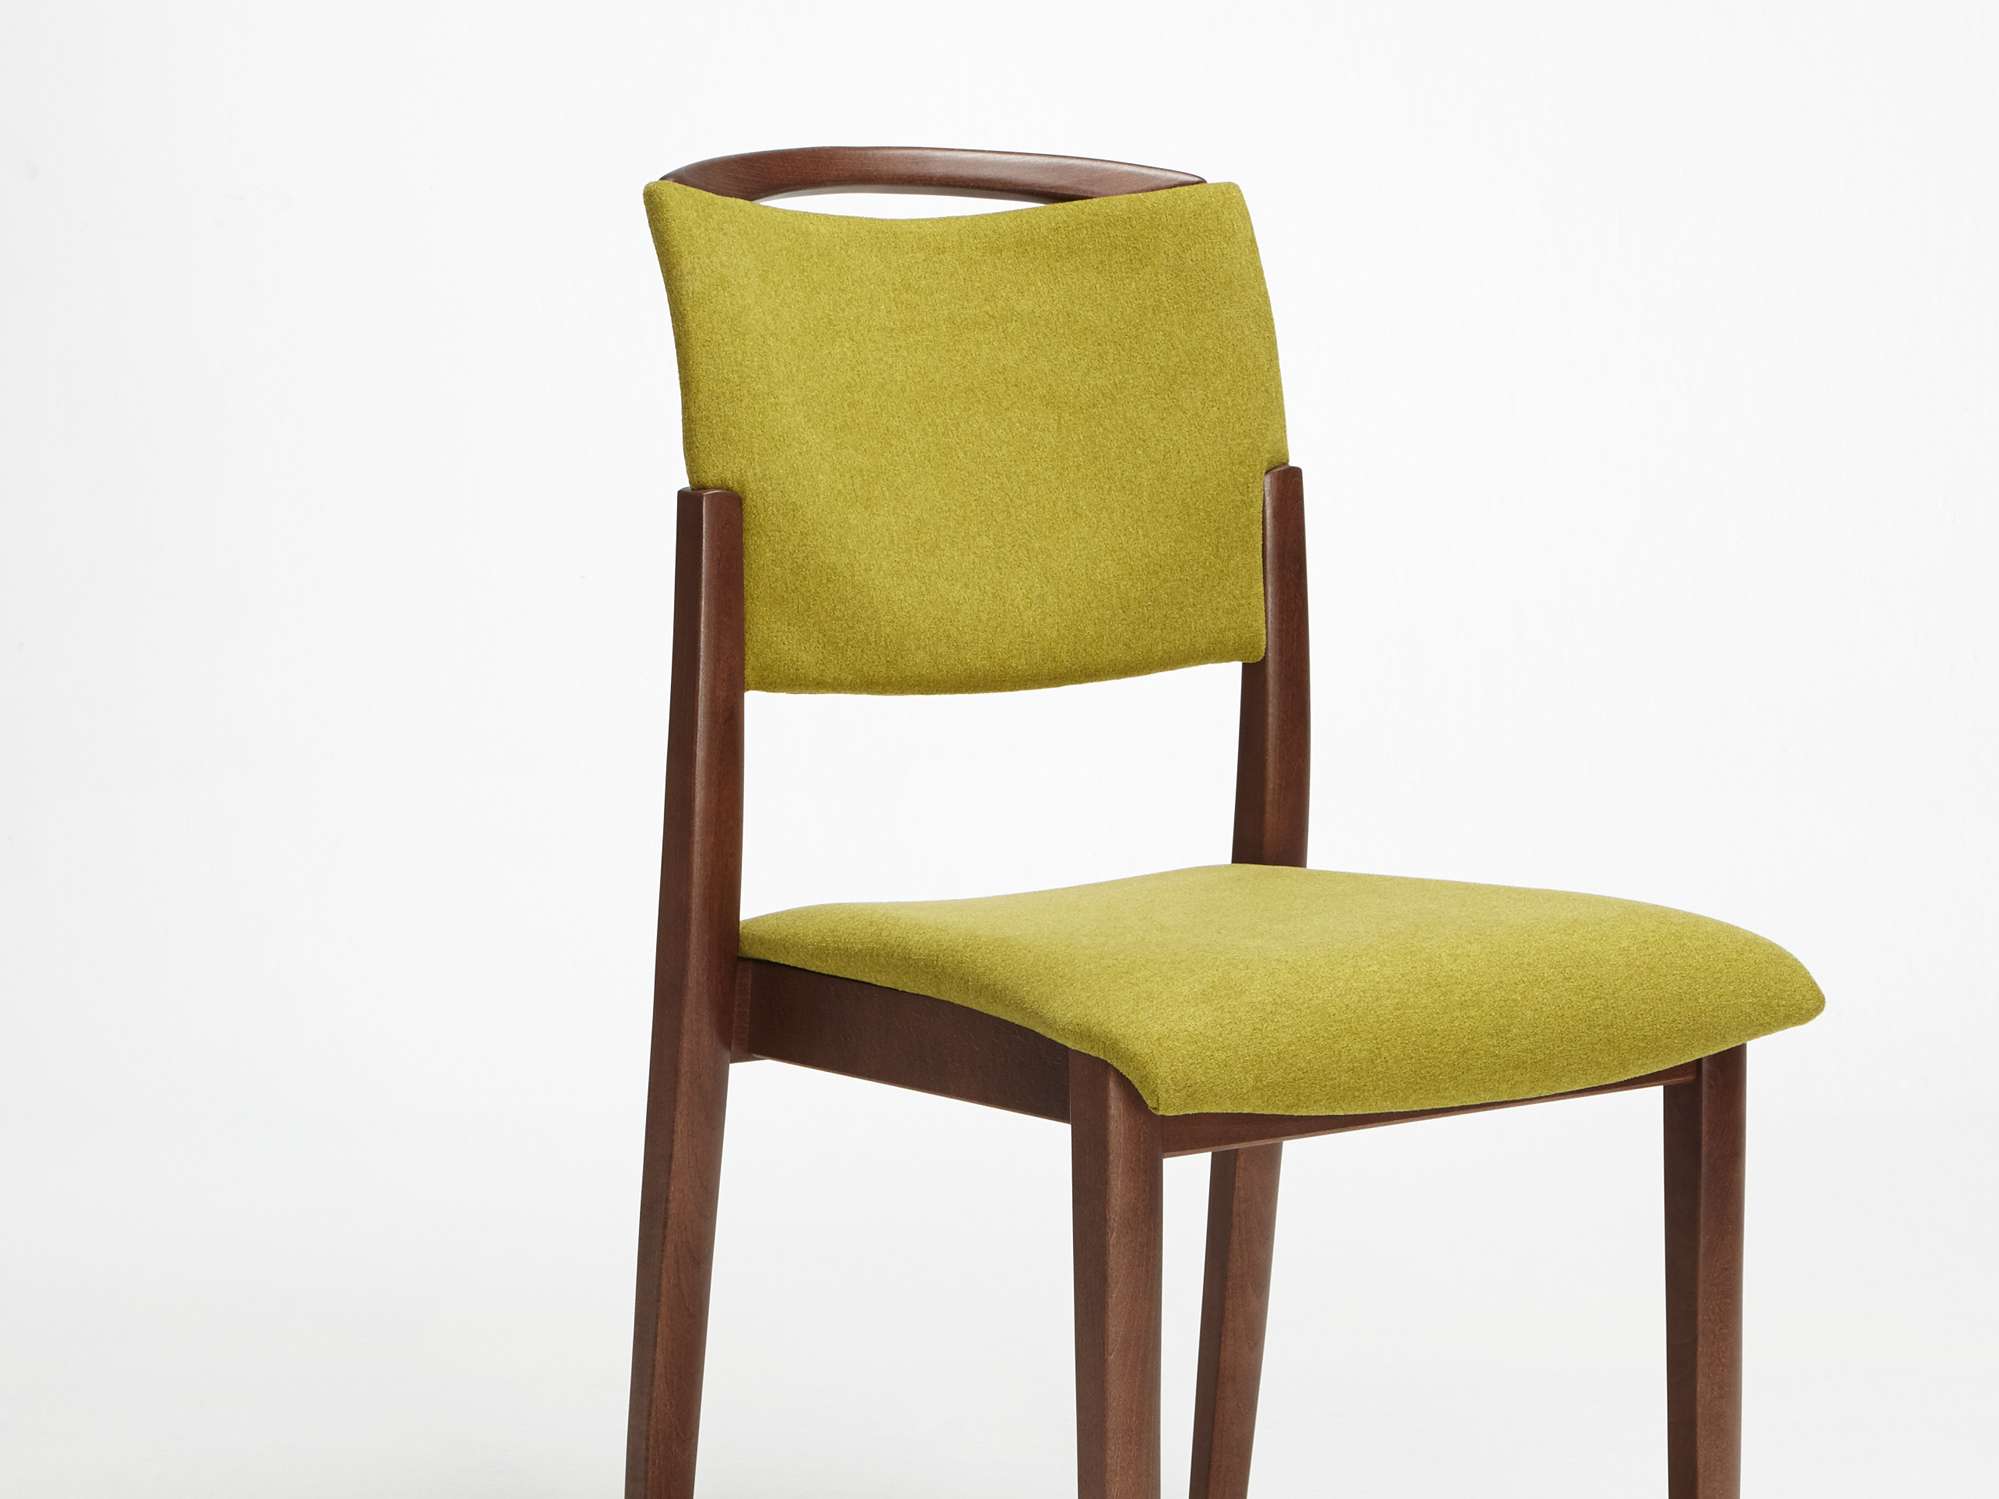 The Fena model as a stacking chair with handle and no armrests